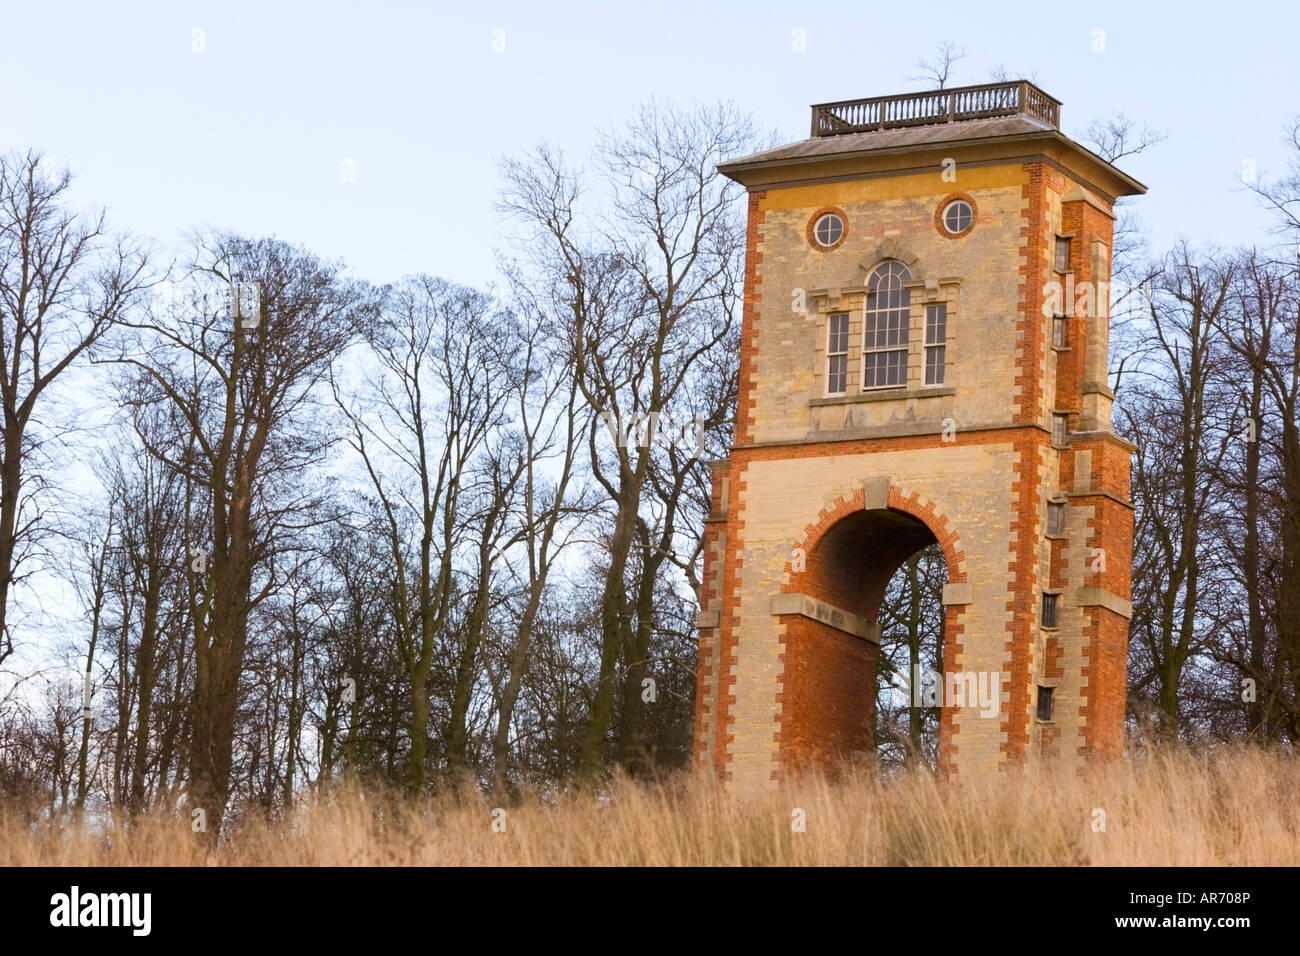 Bellmount Tower, Belton House Folly, Grantham, Lincolnshire, Angleterre Banque D'Images